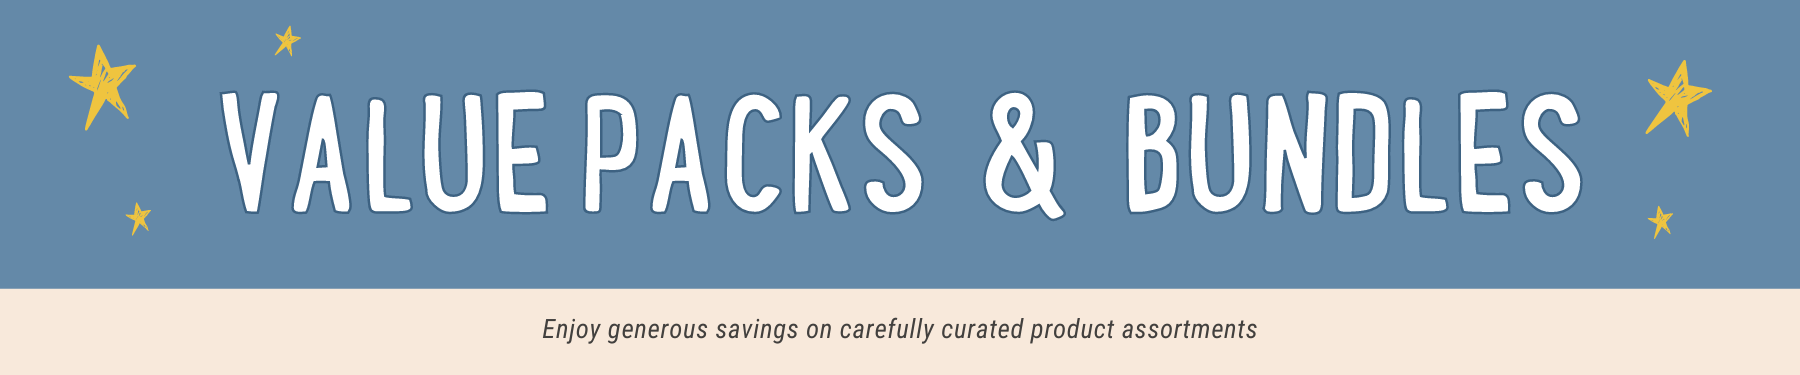 Generous Savings on Value Packs of Natural Open Ended Toys, Arts & Crafts, and School Supplies at Oskar's Wooden Ark, Australia